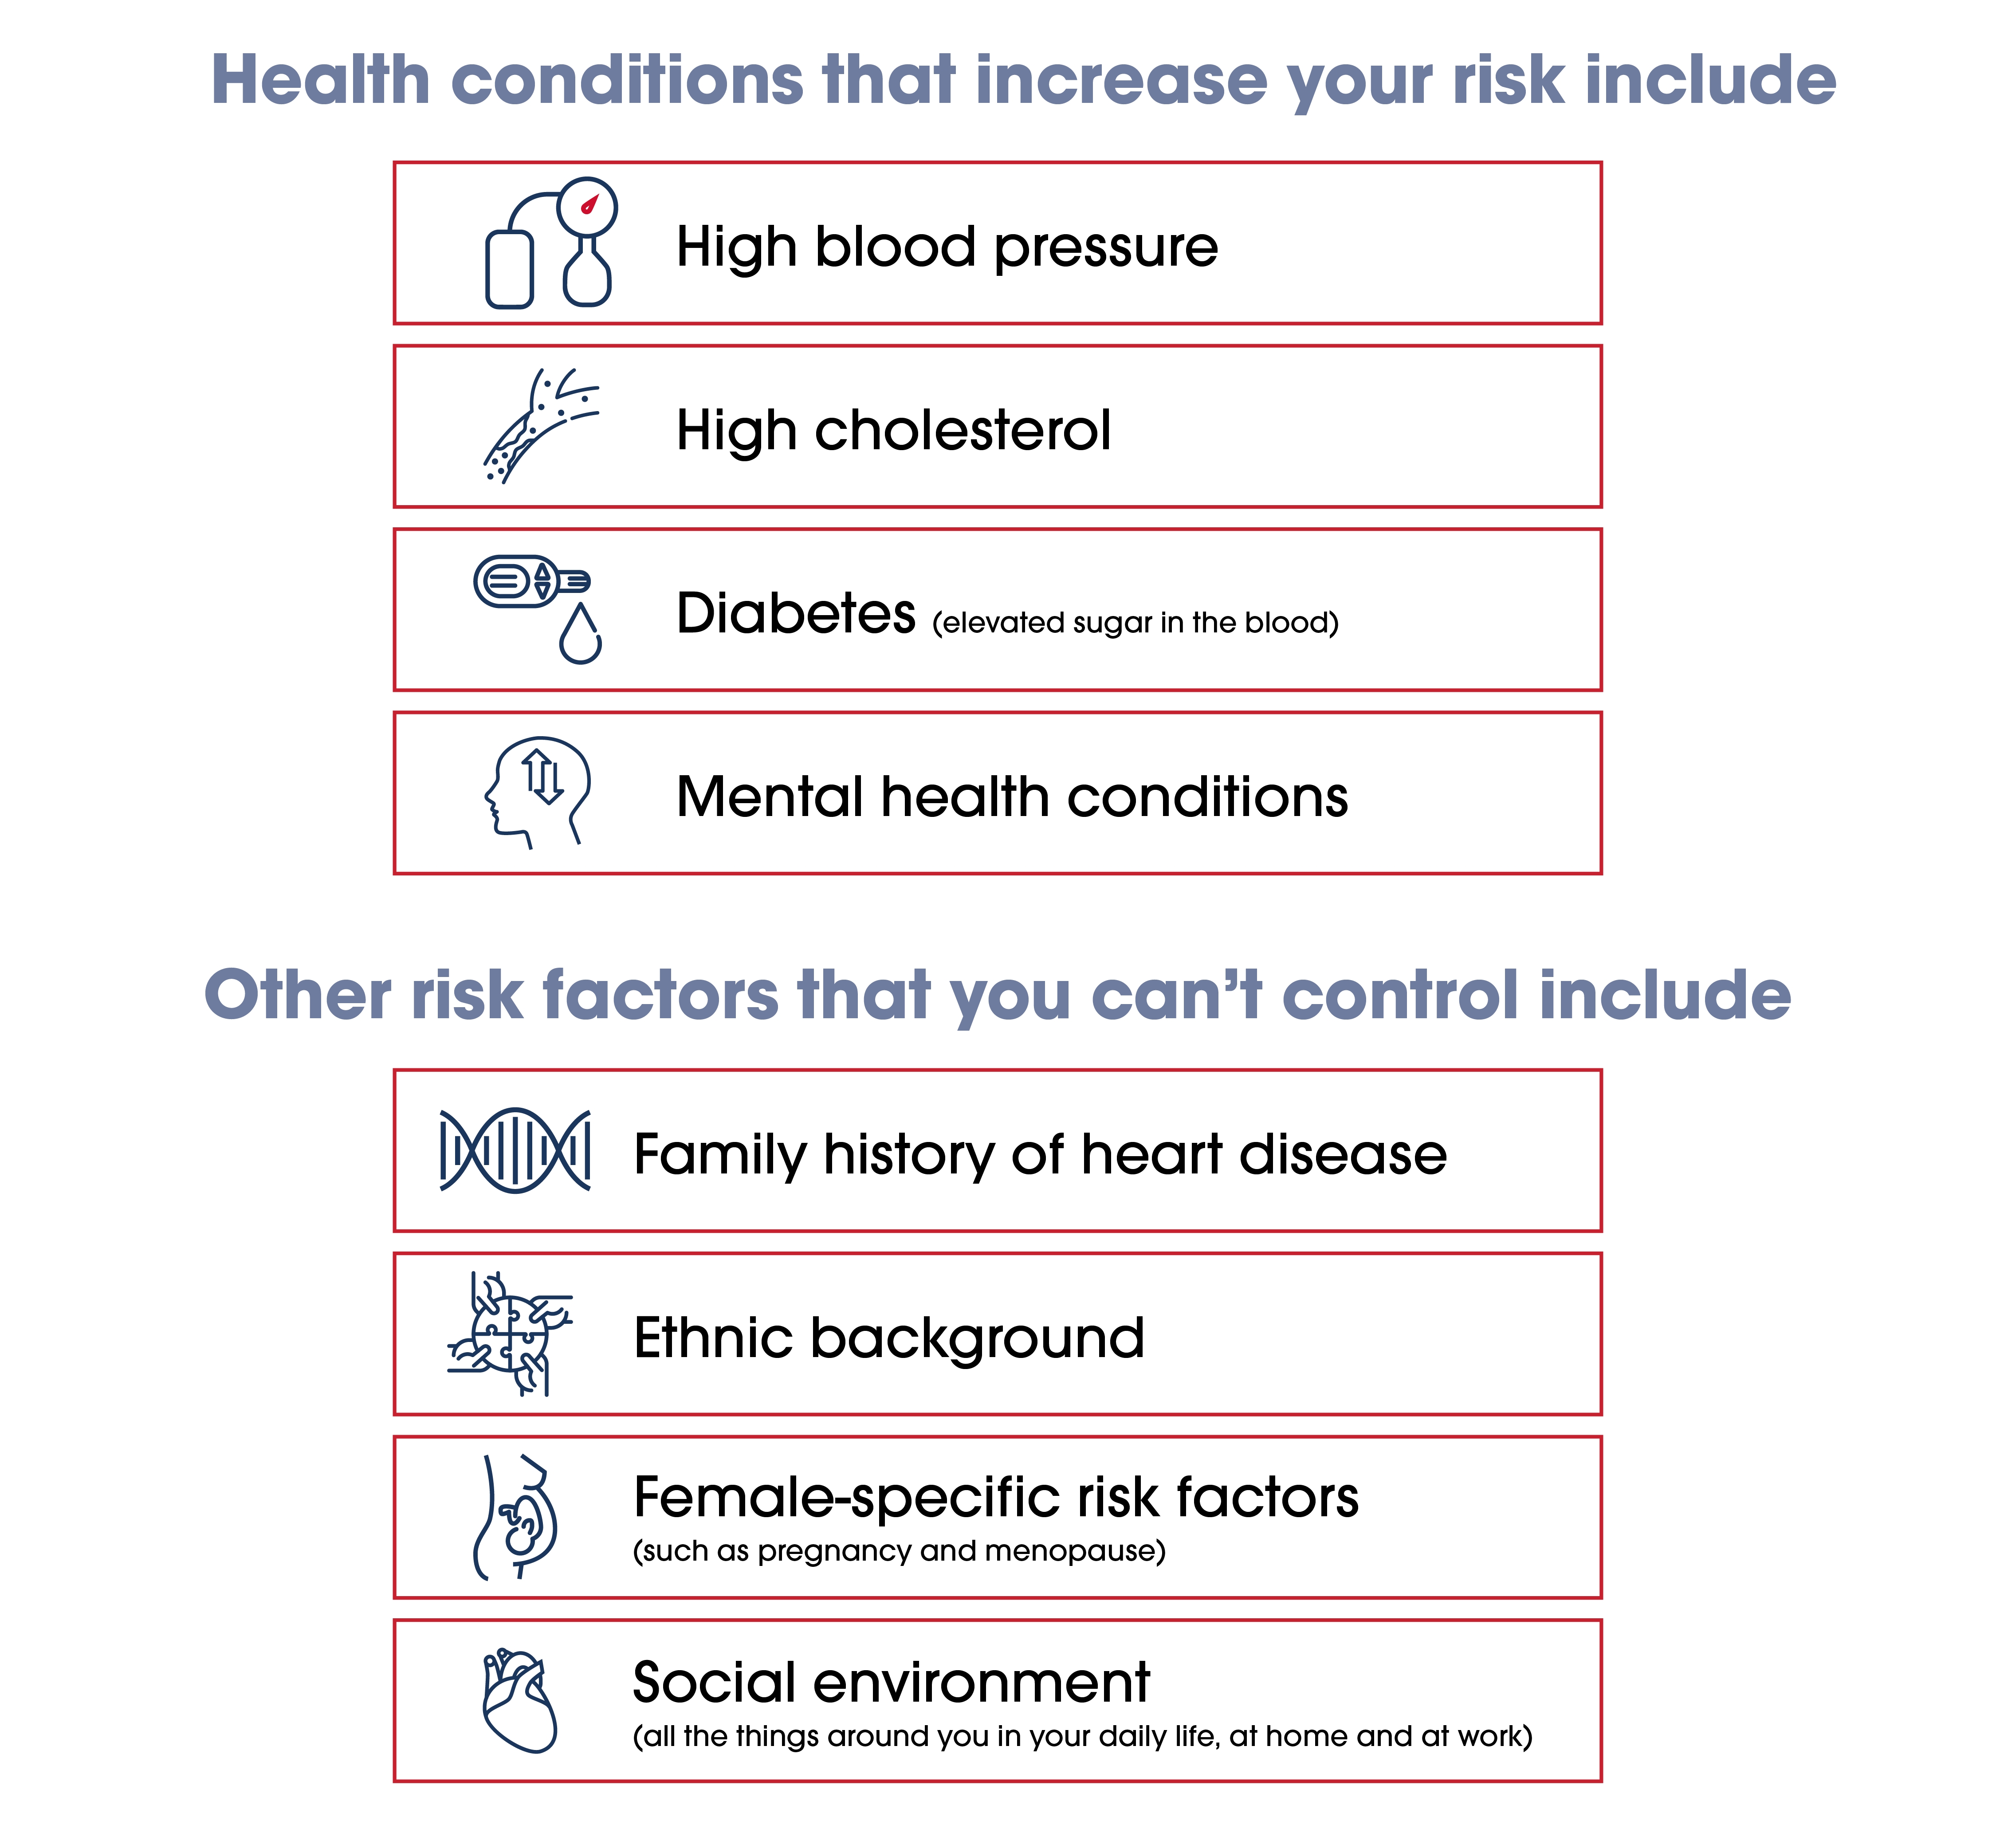 Health conditions and other risk factors that increase your heart disease risk